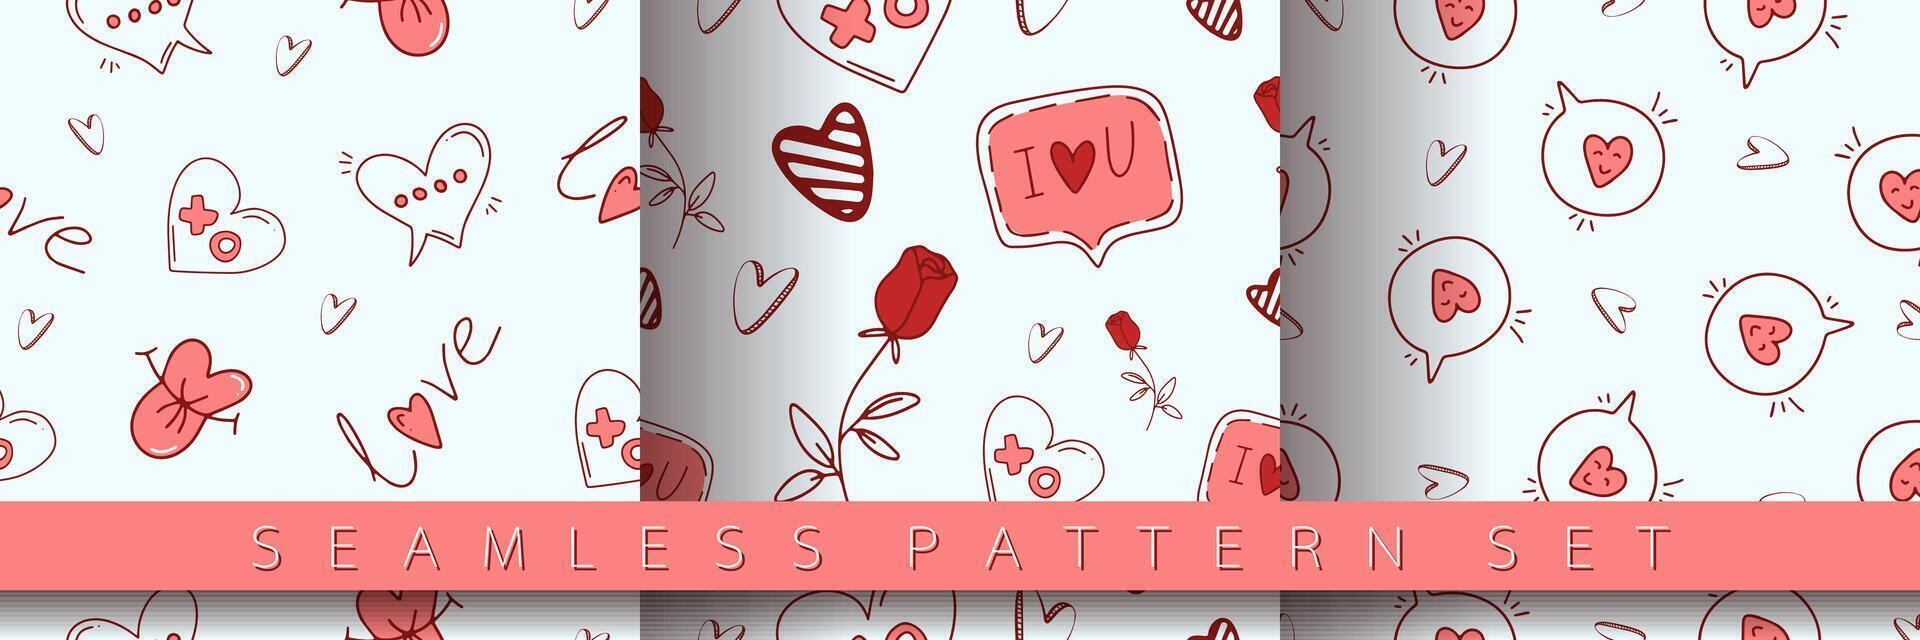 Set of seamless pattern for Valentine's Day with heart and love elements on a white background. Vector doodle theme set, romance for cards, banners, flyers, invitation, blog, wrapping paper, prints.